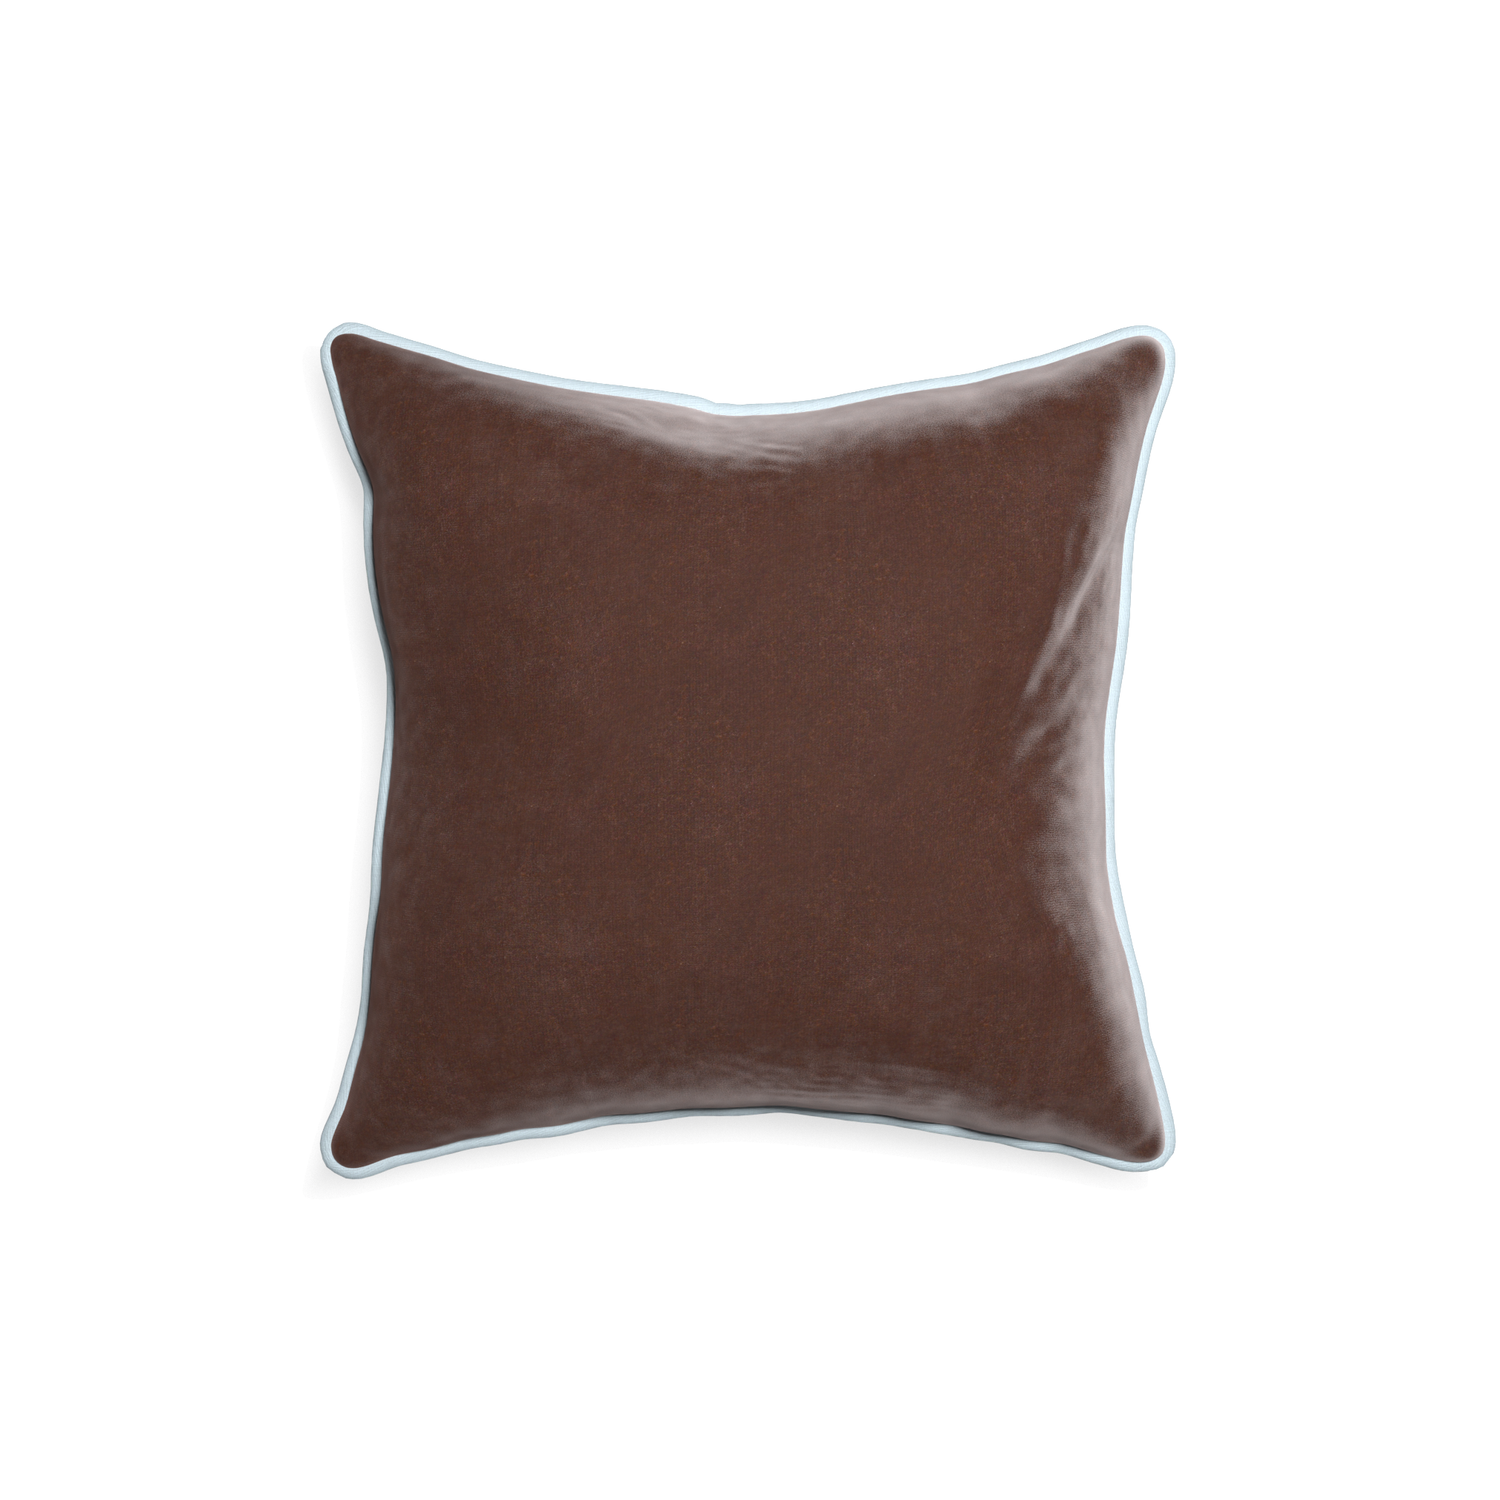 square brown velvet pillow with light blue piping